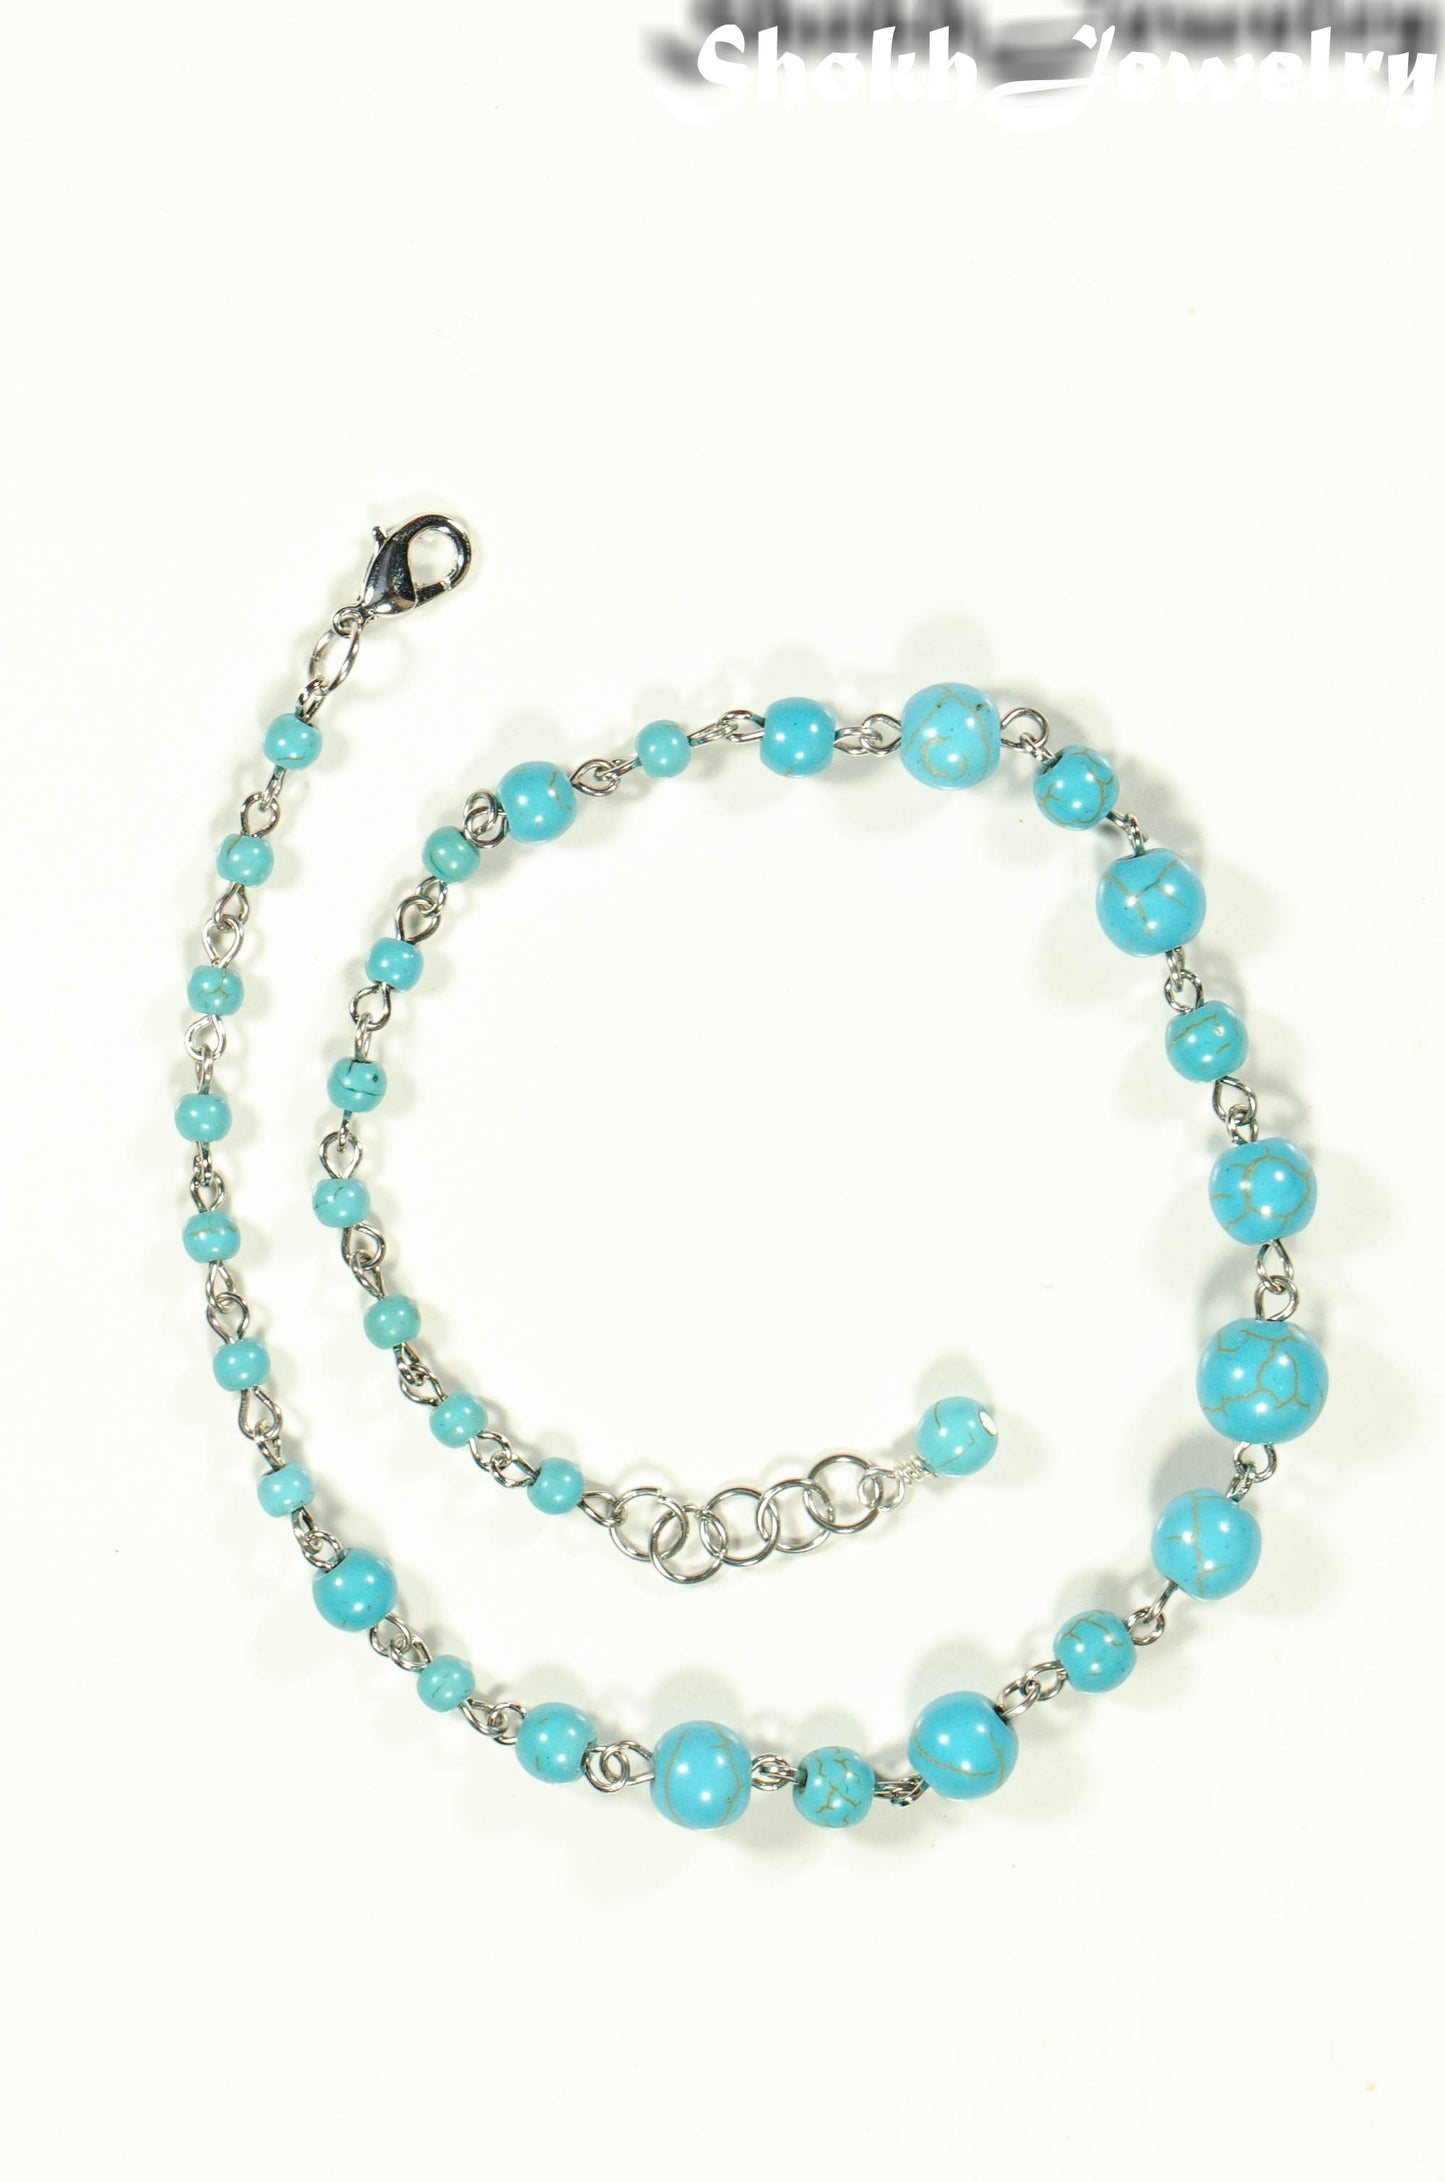 Top view of Handmade Turquoise Howlite Link Chain Anklet.